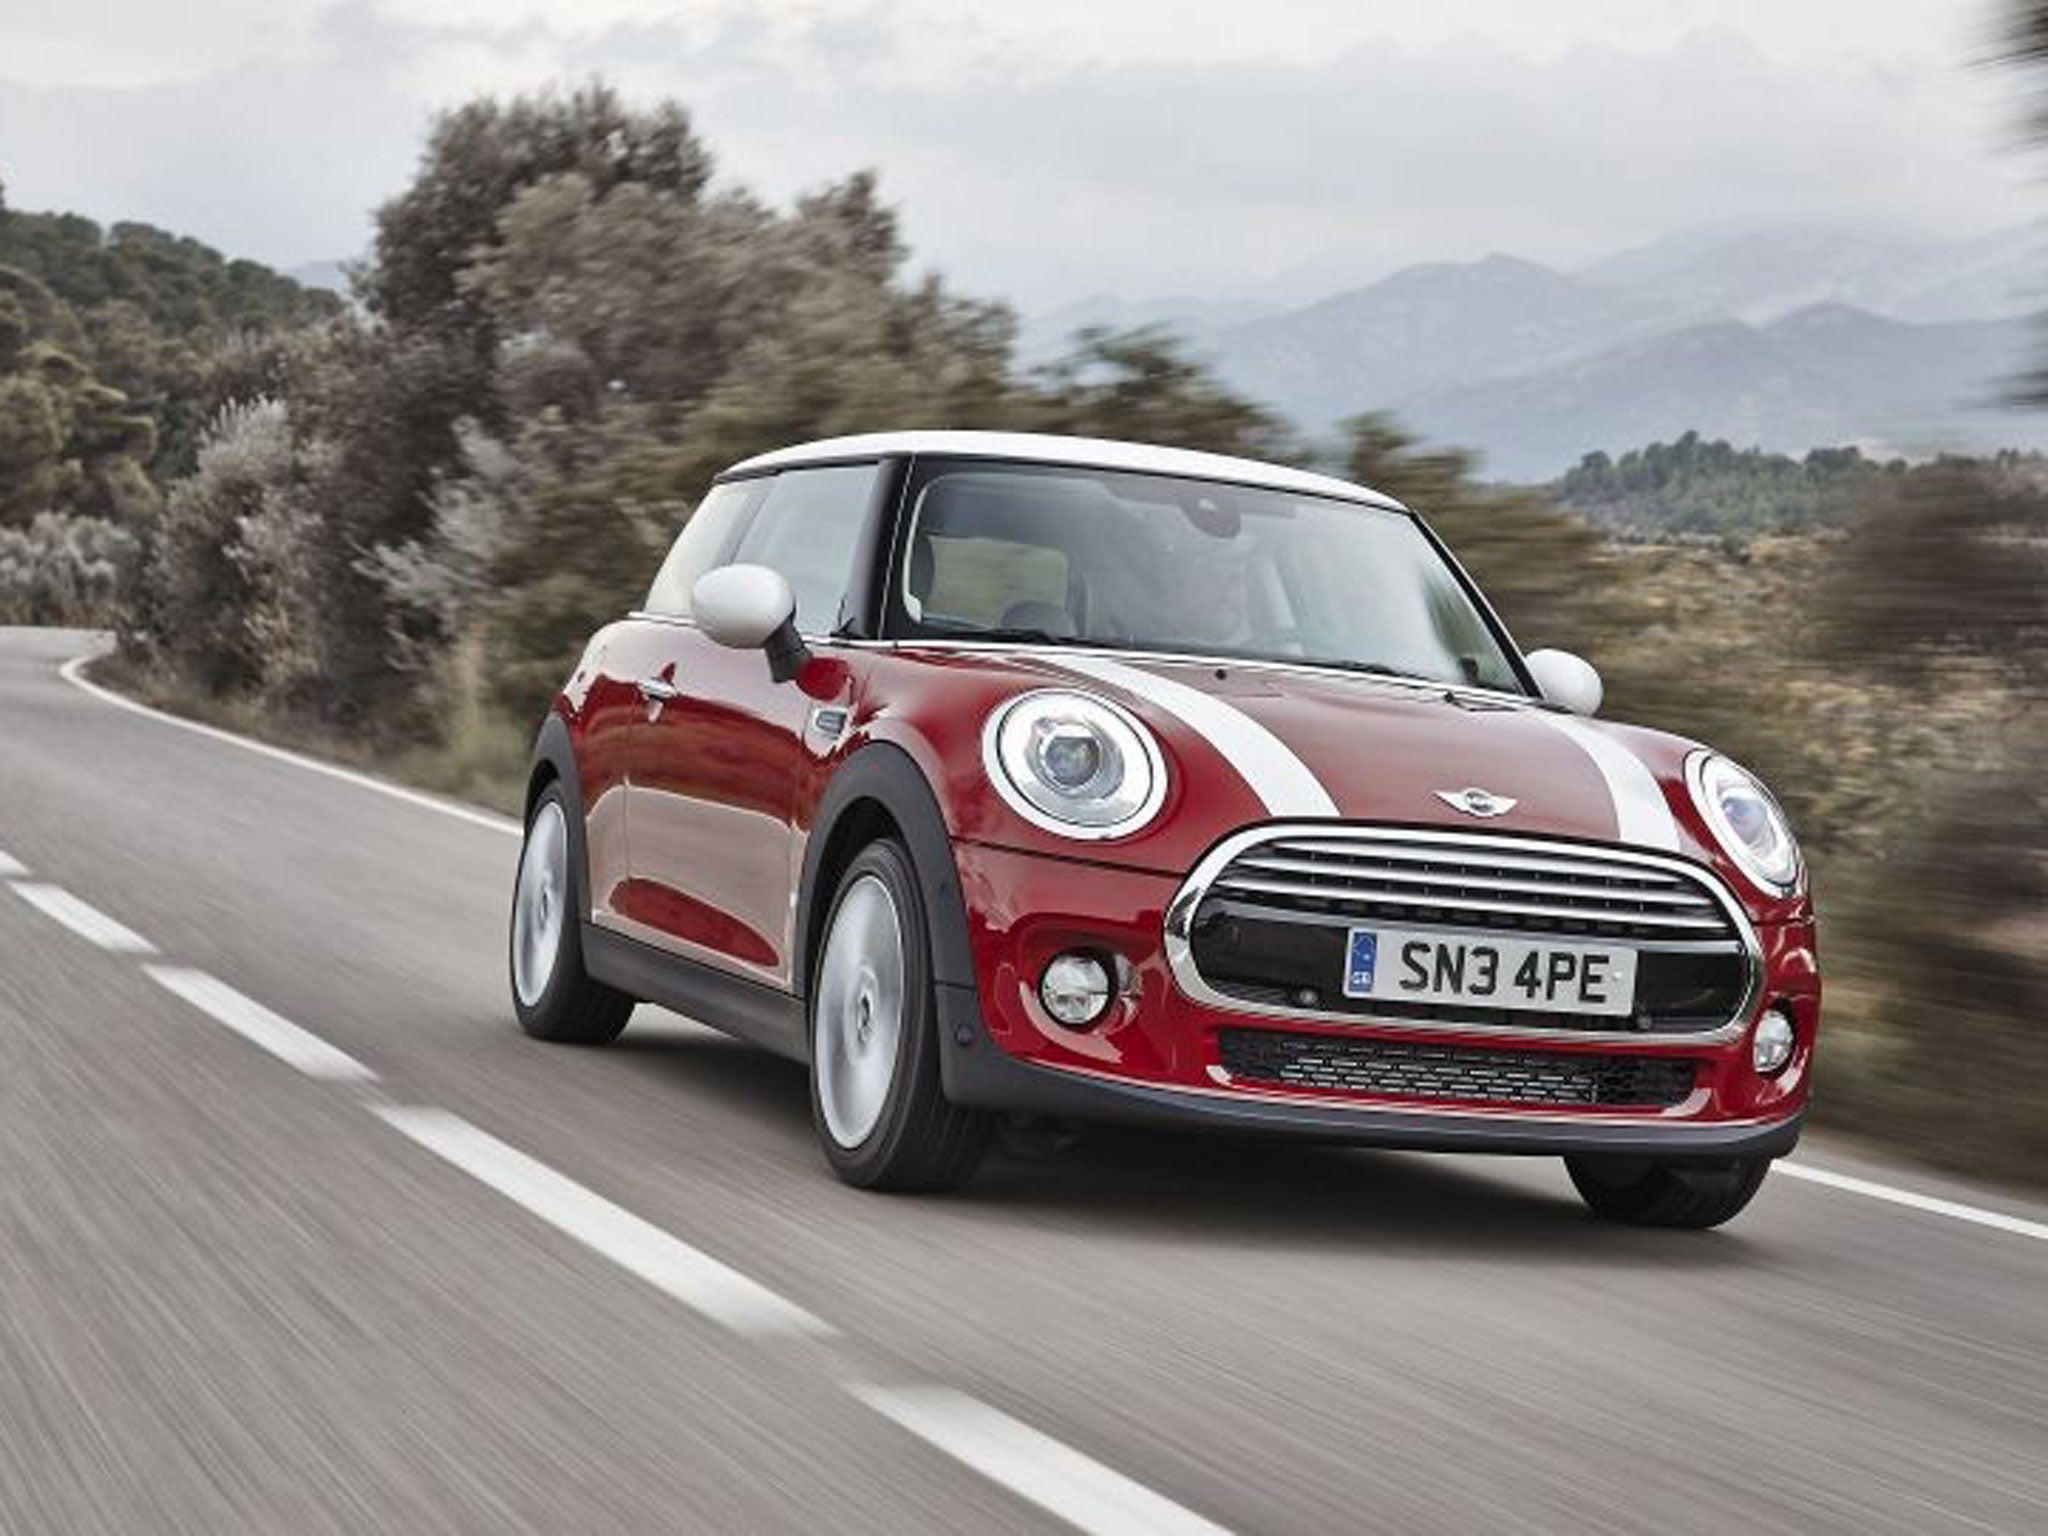 In pictures: BMW launches the new Mini car in Oxford | The Independent